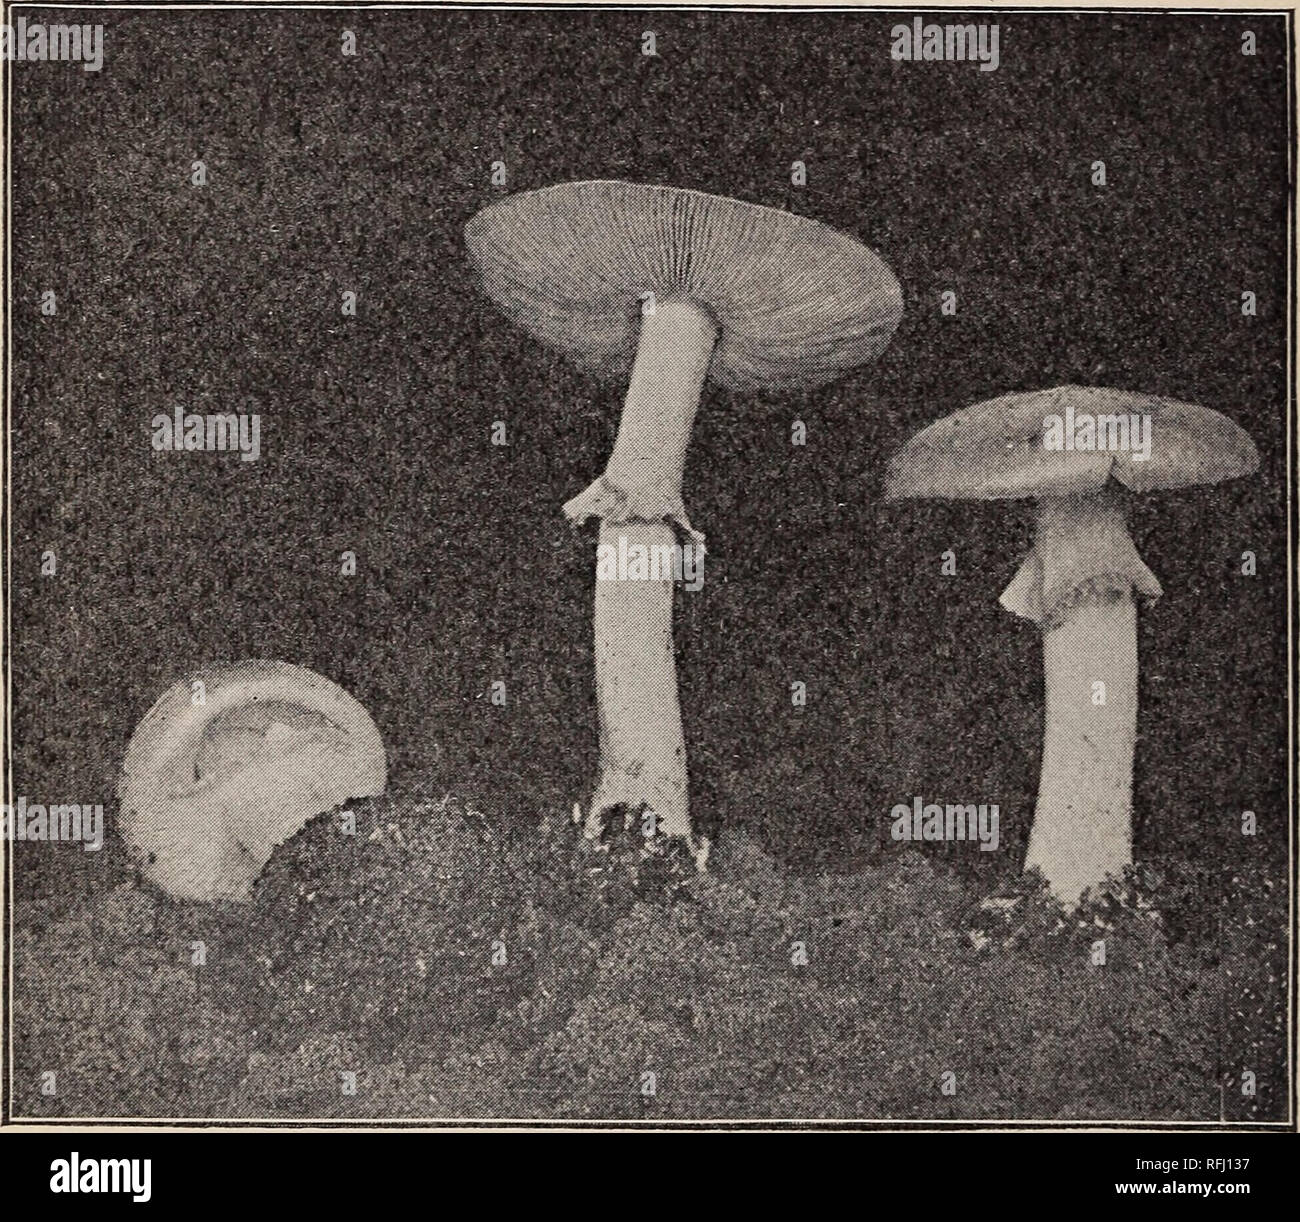 . Observations on recent cases of mushroom poisoning in the District of Columbia. 22 the cup which this species possesses, in common with others sup- posedly poisonous, is especially characteristic. It is usually situated well beneath the surface of the ground and should be carefully dug out when one is securing specimens for identification. Specimens occur, however, in which the inner surface of the cup is attached throughout to the stem, so that it presents the appearance, not of a cup, but of a mere bulbous base. The death cup is a species not so abundant in the vicinity of Washington as th Stock Photo